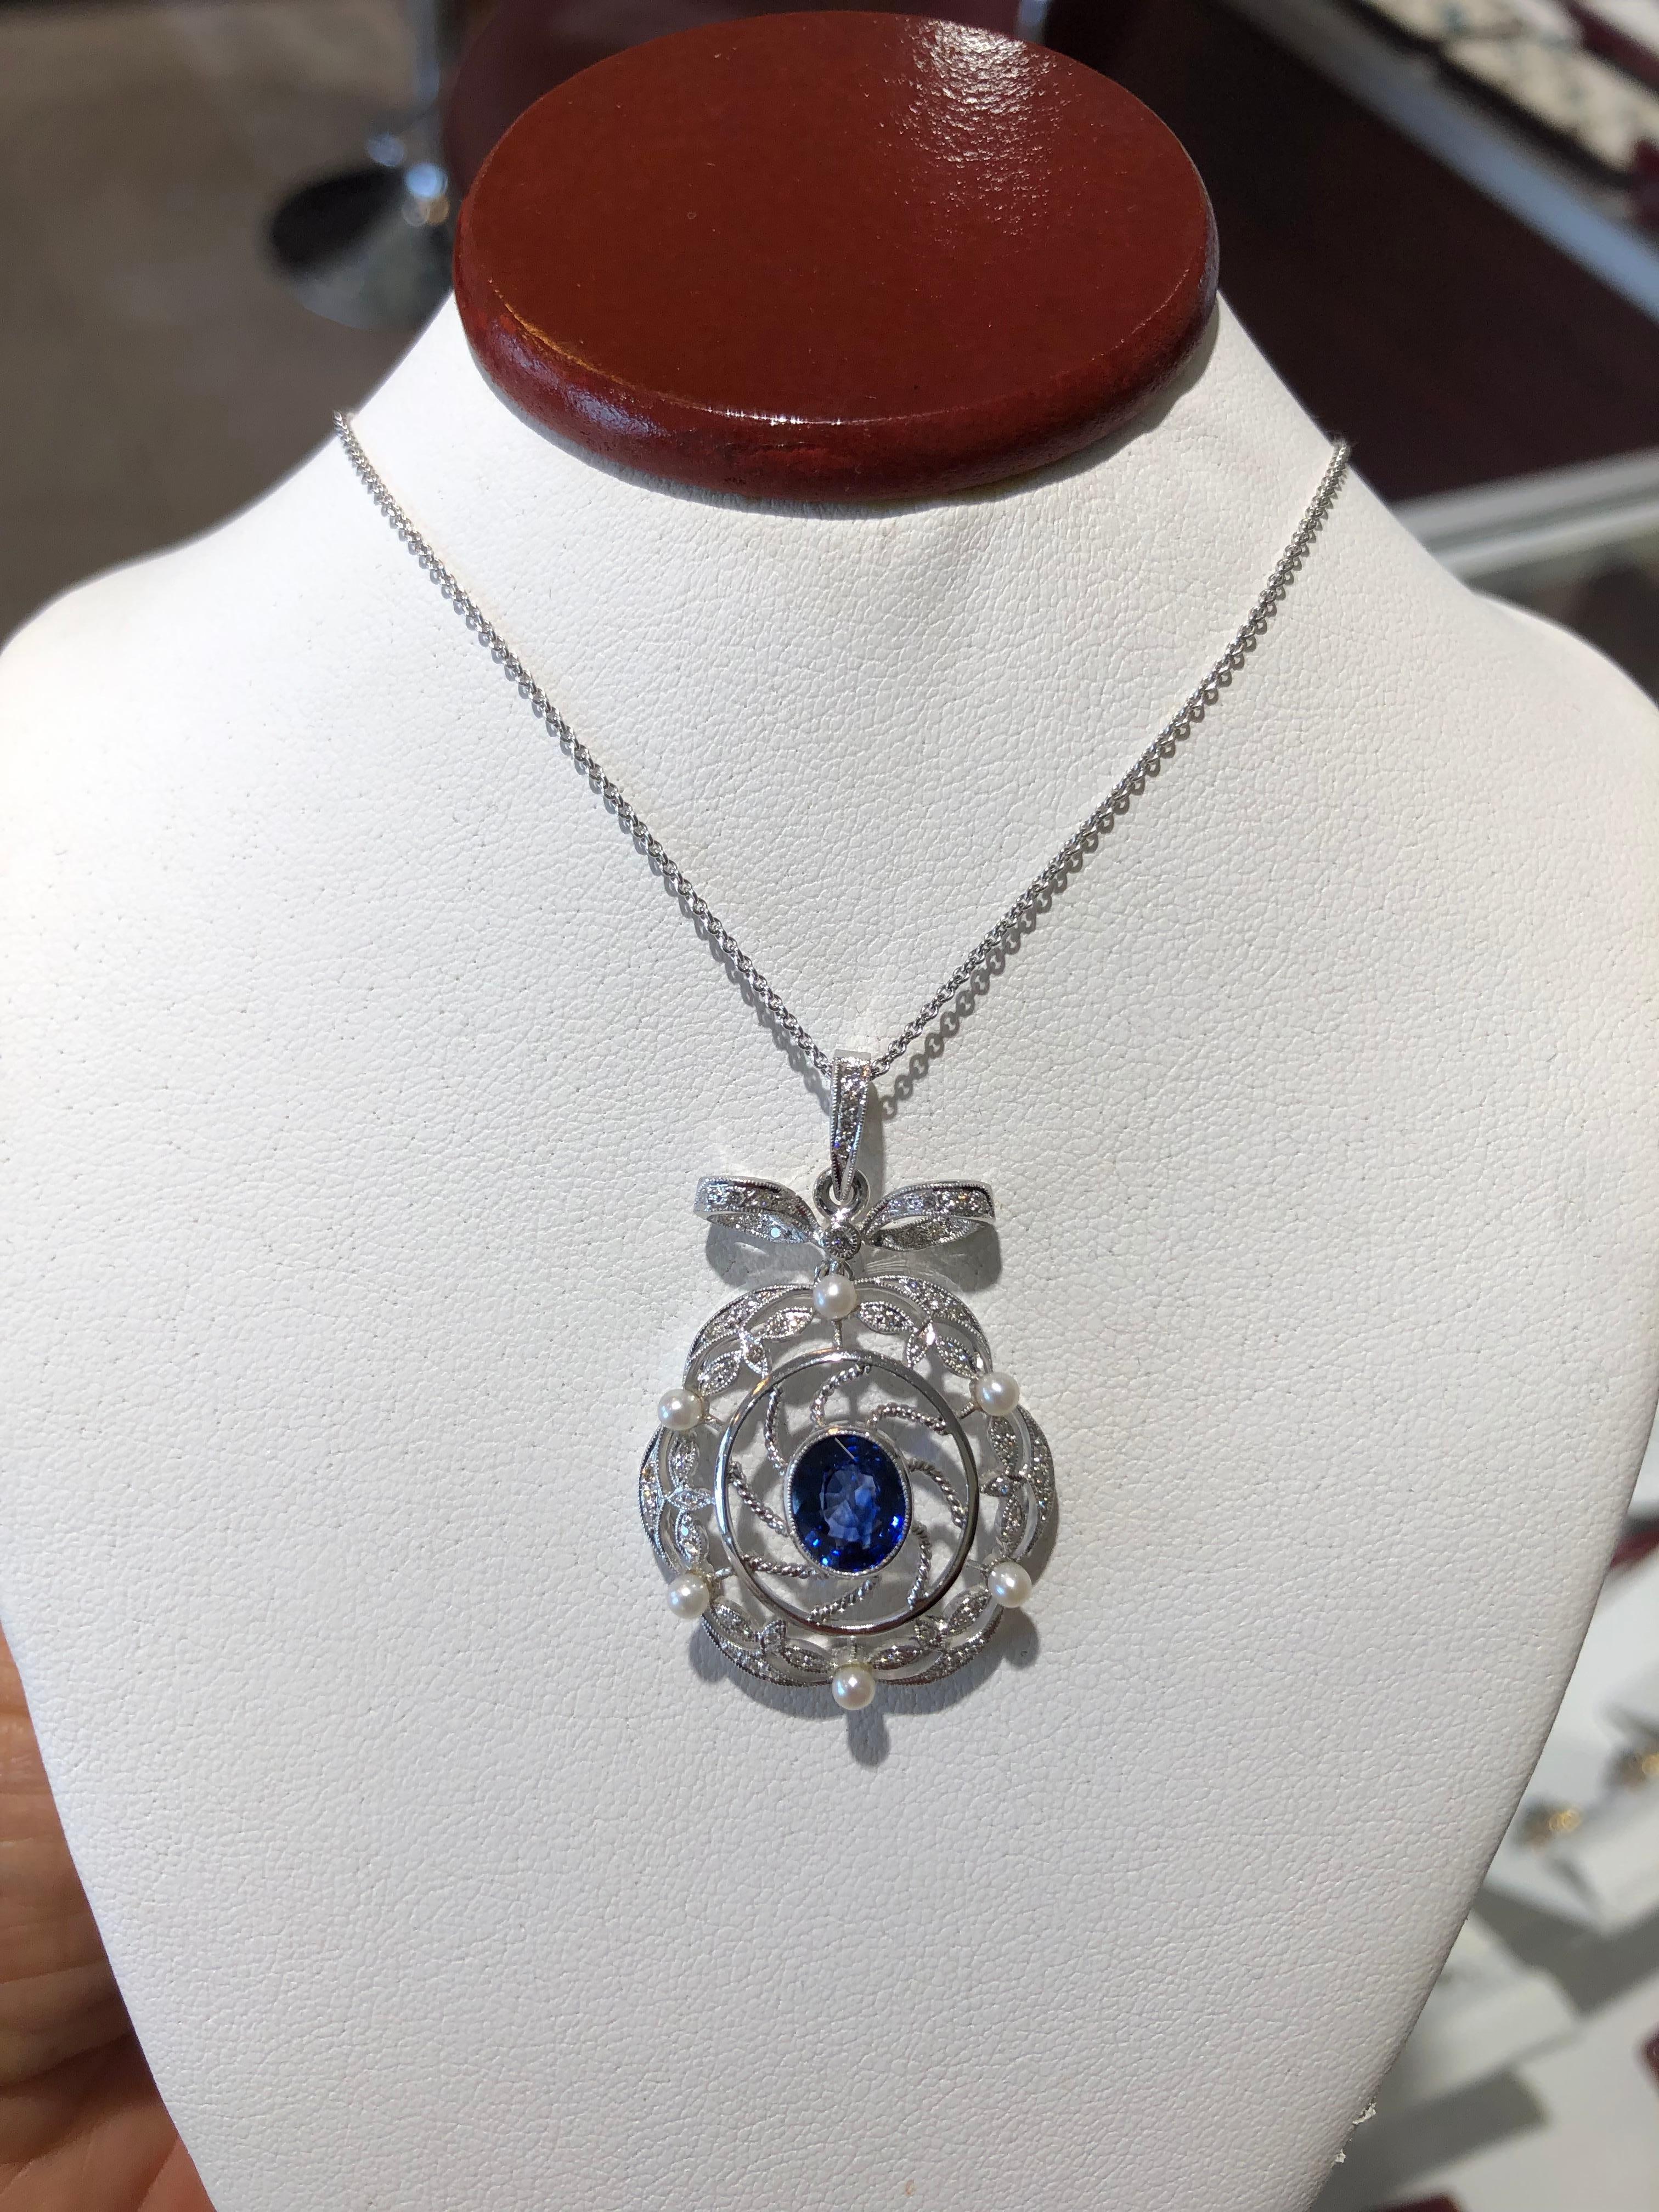 Victorian Style Ceylon Sapphire Diamond Pearl 18K Gold Pendant Necklace
Fantastic Pendant Modeled after one of the most extravagant time periods. Featuring numerous diamonds and lustrous seed pearls sprinkled throughout the expertly crafted mesh 18K